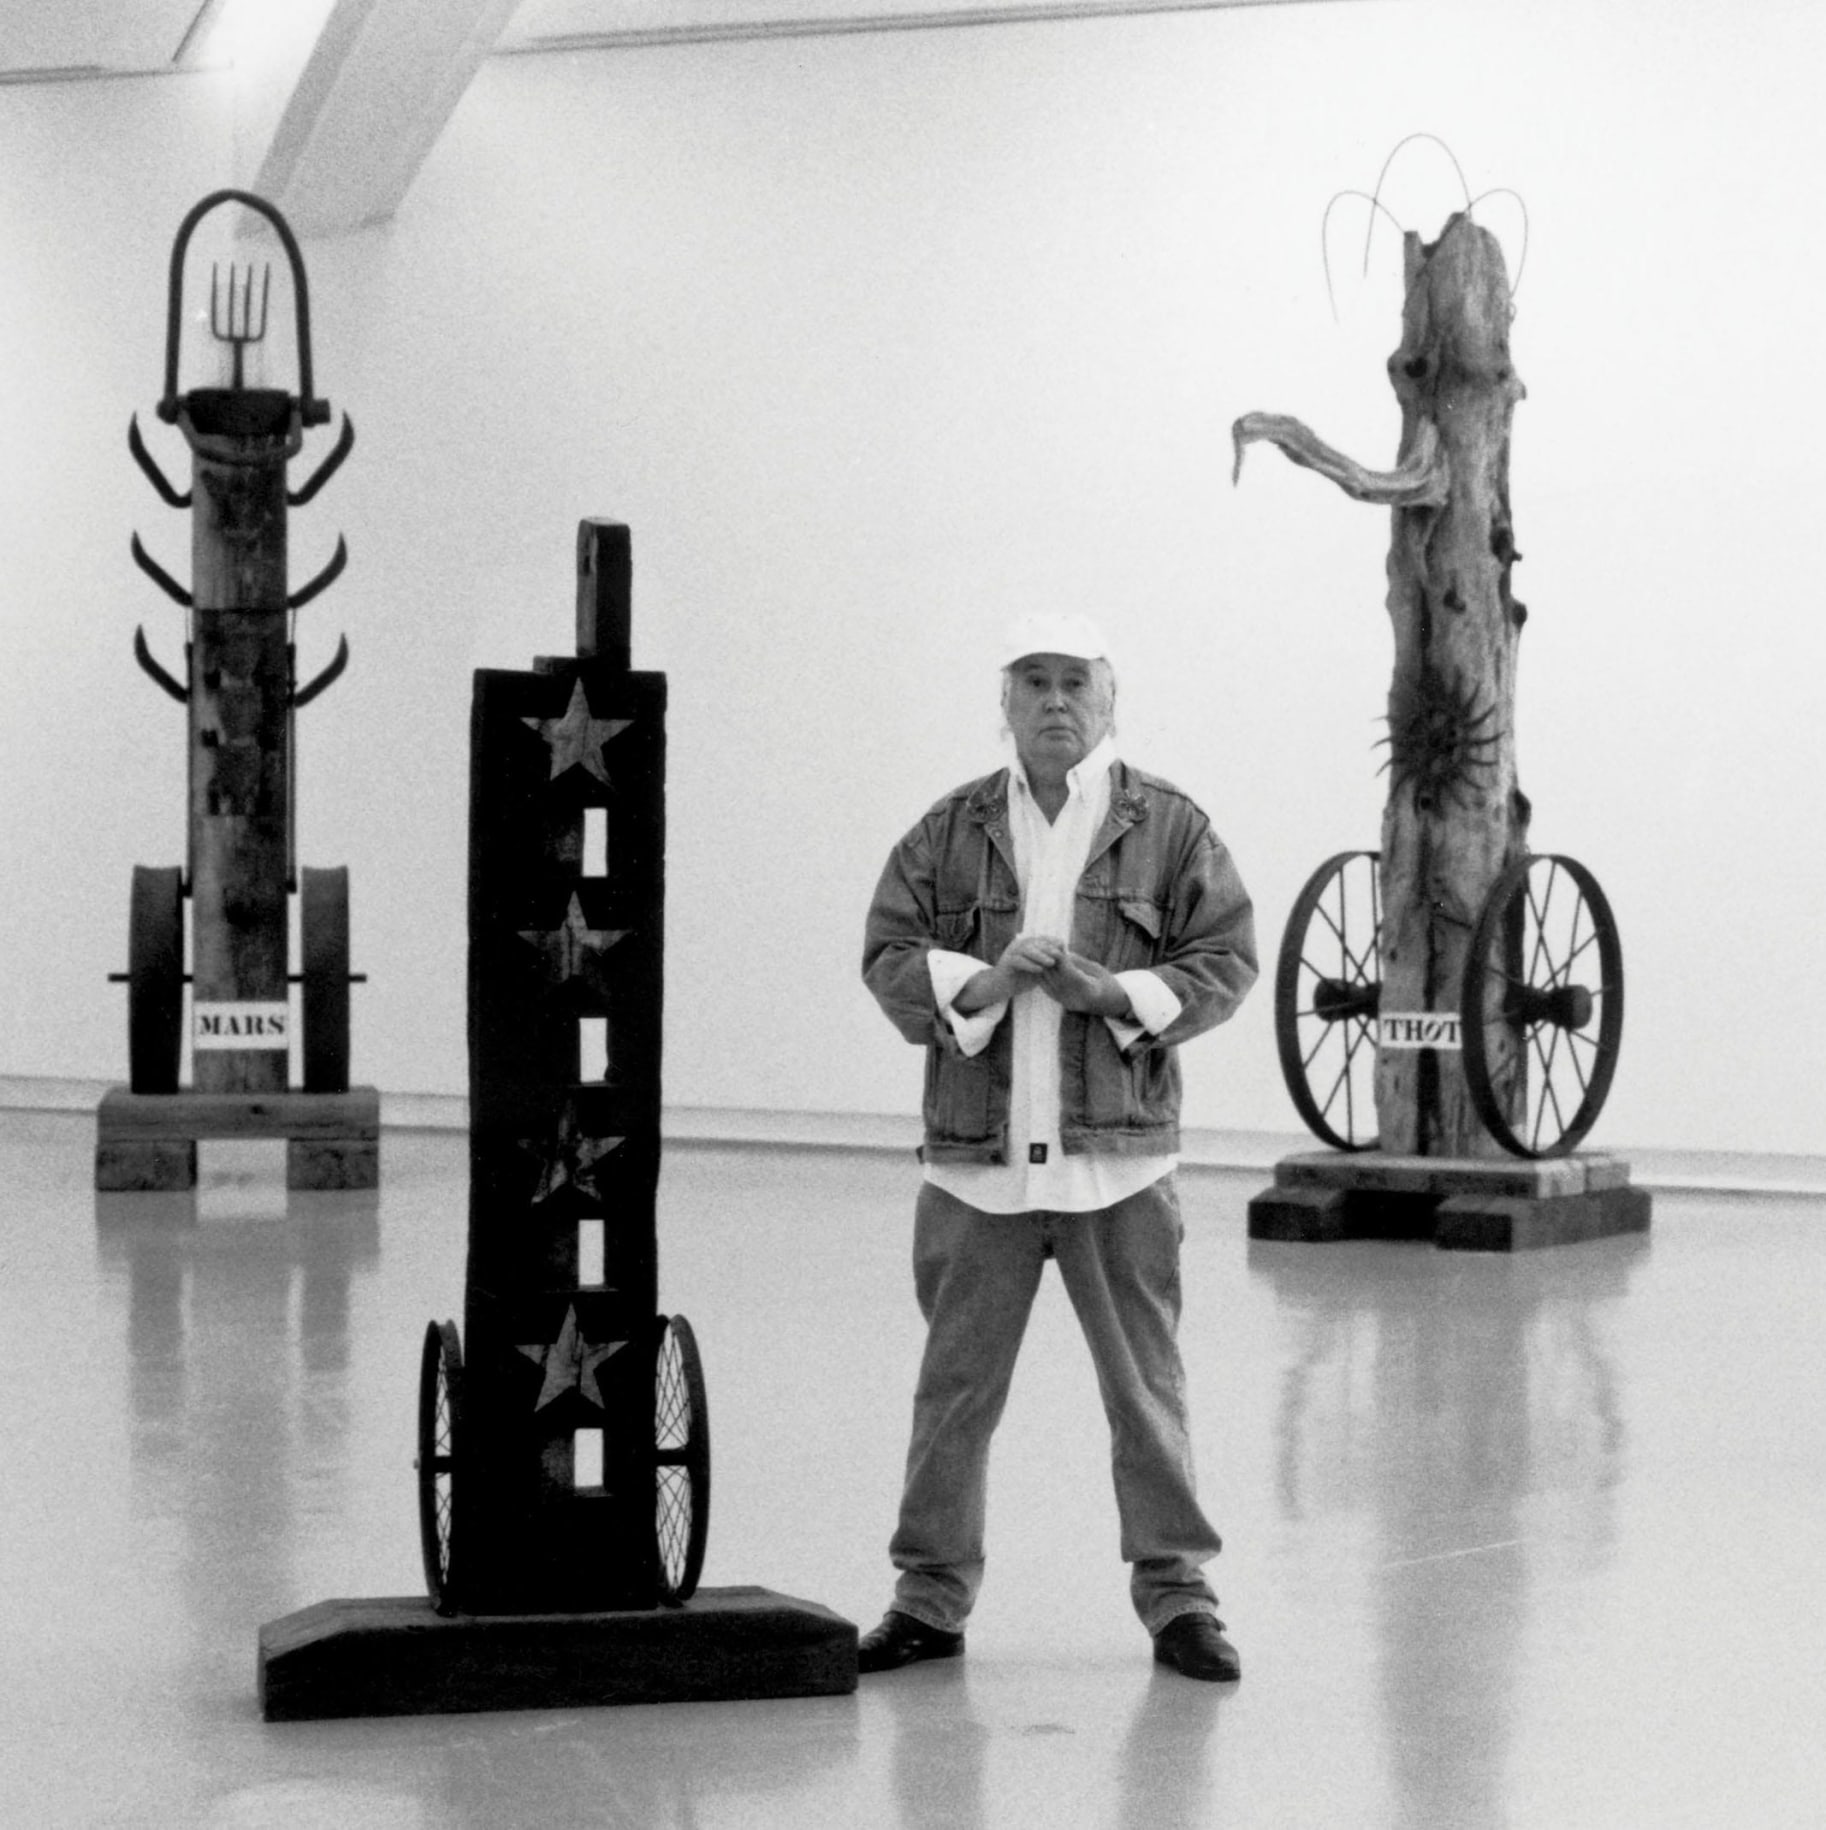 Robert Indiana with, left to right, Mars (1990), Four Star (1993), and Thoth (1985), at the exhibition Robert Indiana: R&eacute;trospective, 1958&ndash;1998, Mus&eacute;e d&rsquo;Art Moderne et d&rsquo;Art Contemporain, Nice, France,&nbsp;June 26&ndash;November 22, 1998&nbsp;